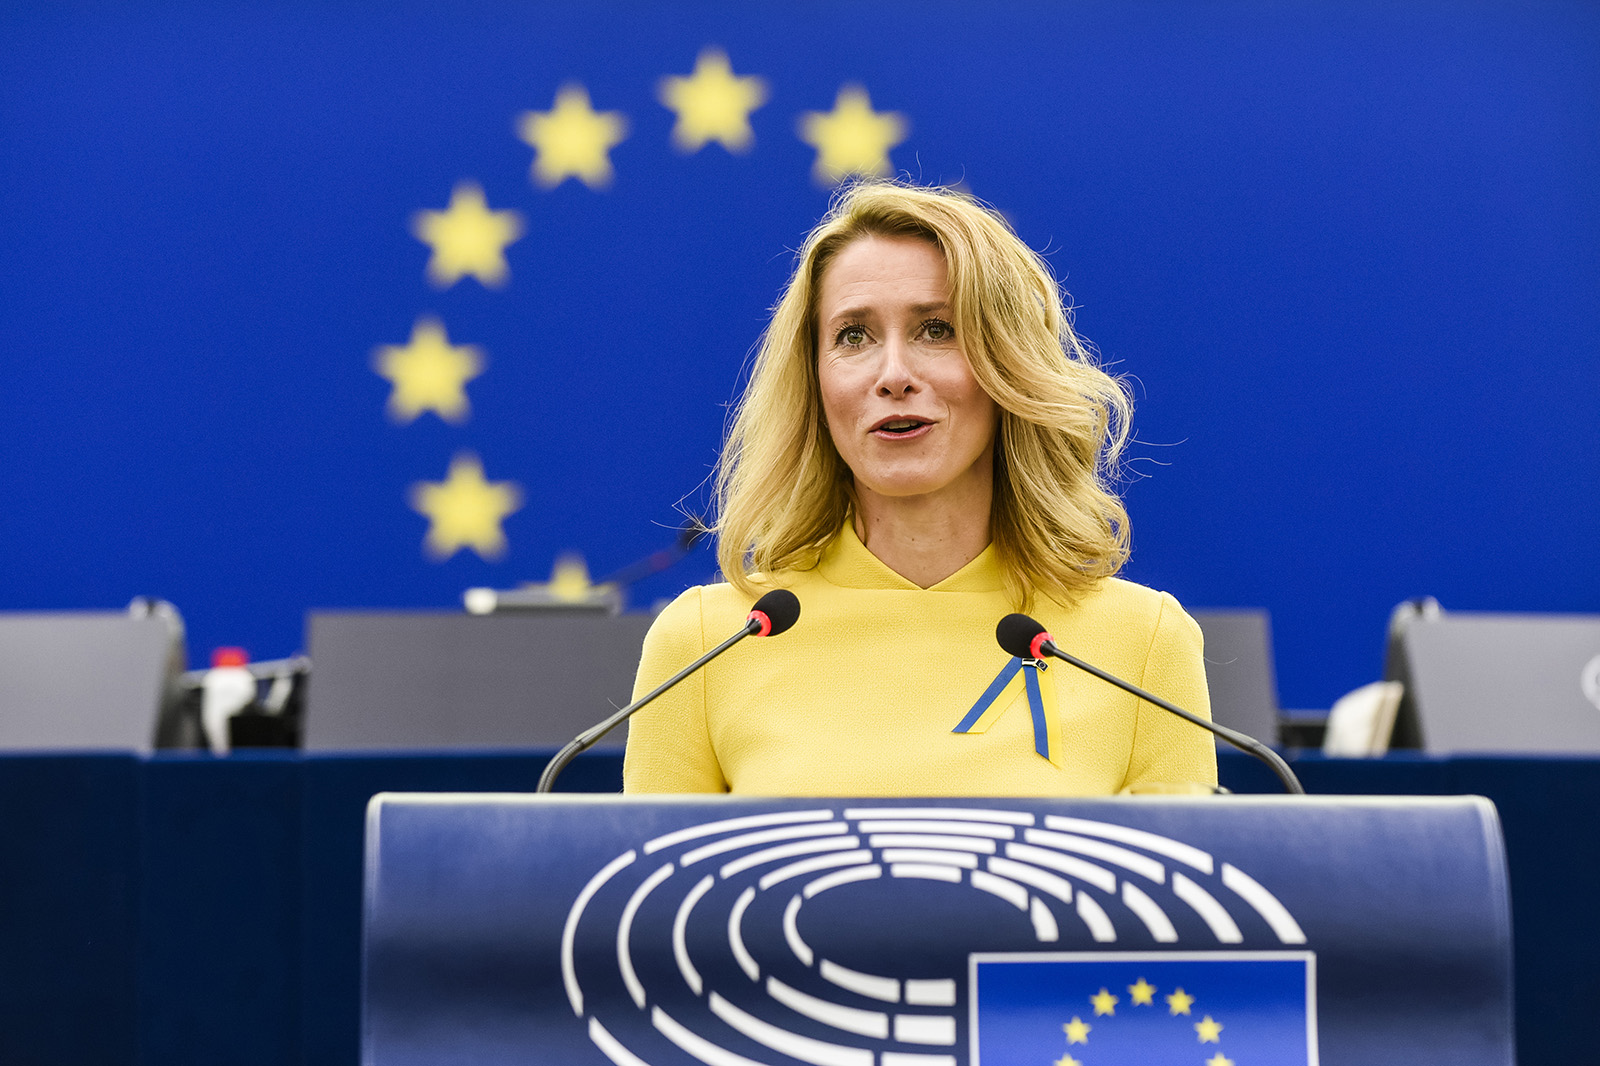 Estonian Prime Minister Kaja Kallas delivers a speech during a debate at the European Parliament in Strasbourg, France, on March 9 about the security situation in Europe following Russia's invasion of Ukraine